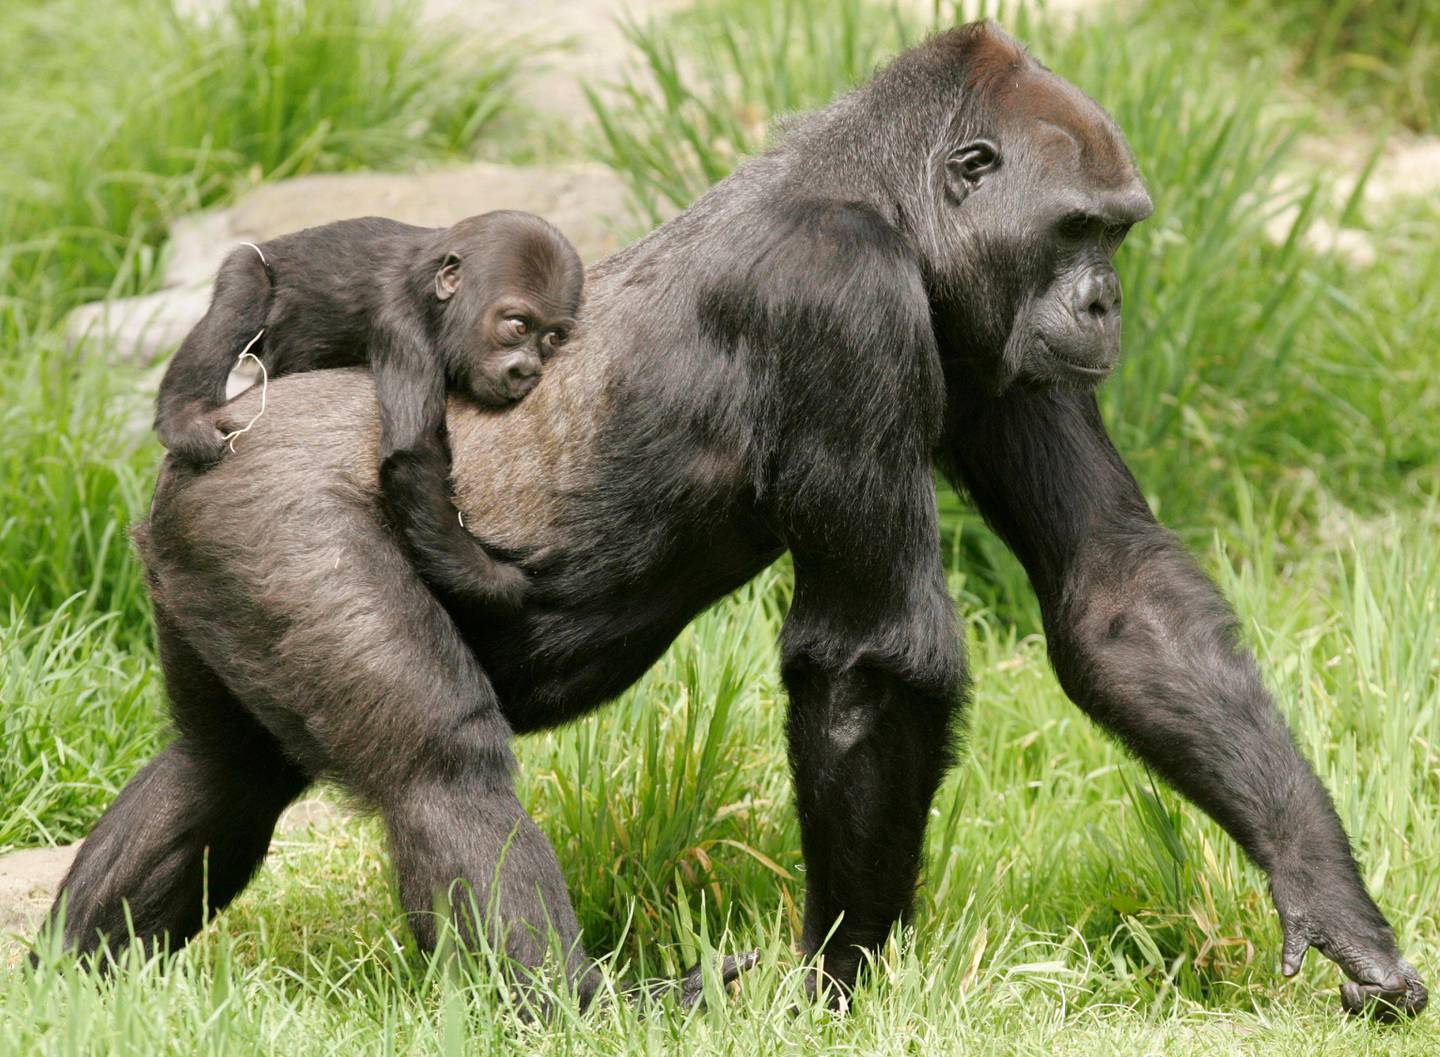 Hasani, a six-month old western lowland gorilla, rides in the back of his surrogate mother Bawang at the San Francisco Zoo in San Francisco, Friday, June 5, 2009. Hasani, who's name means "handsome" in Swahili, is the first gorilla born in captivity at the zoo in 11 years.  Bawang, who's 29 years old, became the baby gorilla's surrogate mother after his birth mother Monifa showed no interest in raising him. The western lowland gorilla's natural habitat is in Central Africa. It is currently on the critically endangered list.   (AP Photo/Marcio Jose Sanchez)